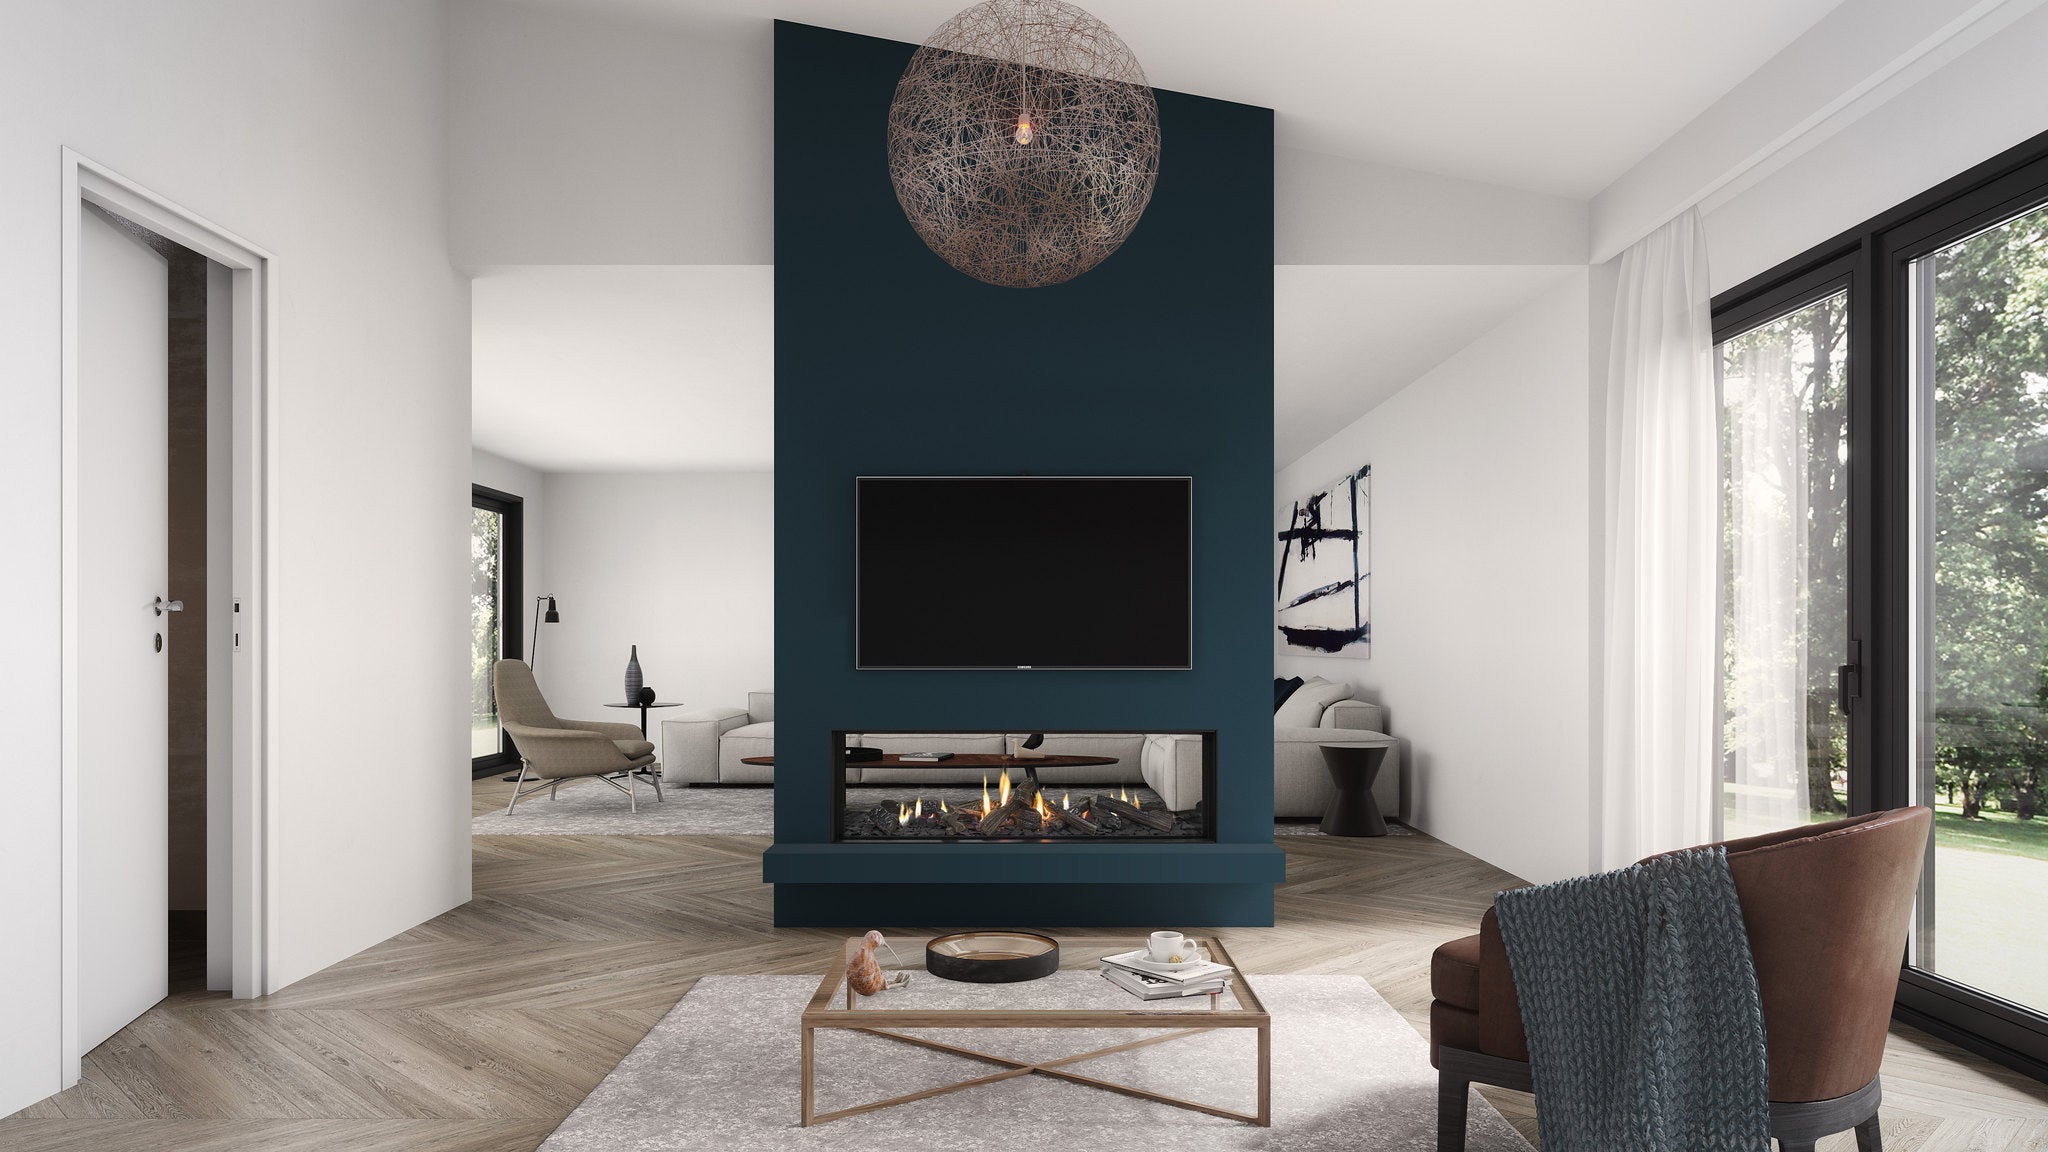 Escea DS1400 NG Single Sided Fireplace